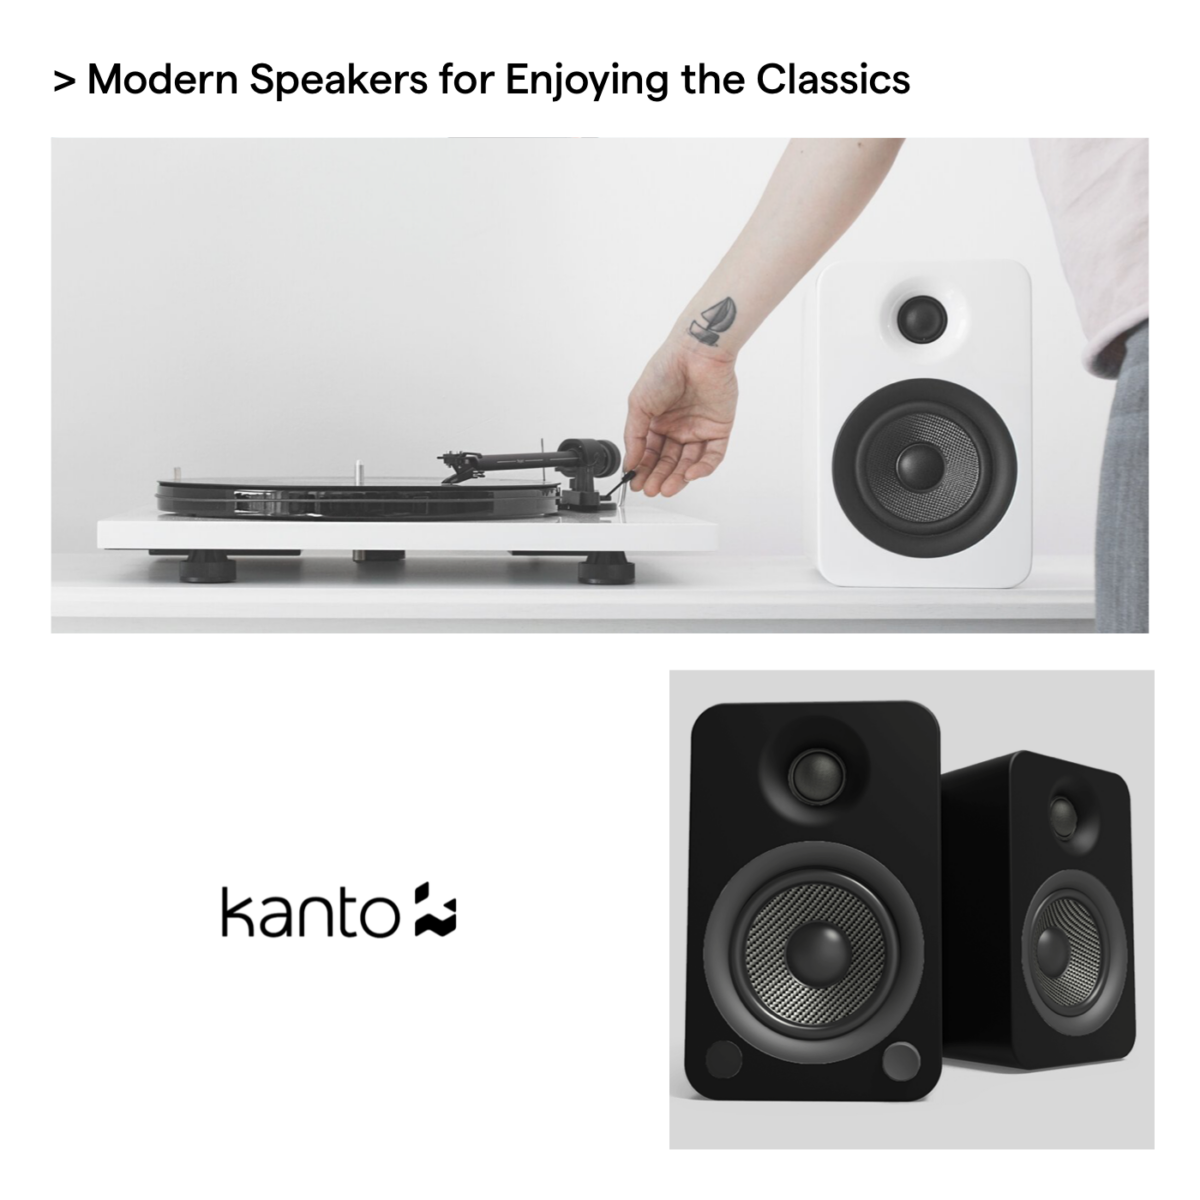 kanto audio speakers father's day advanced essentials gift guide